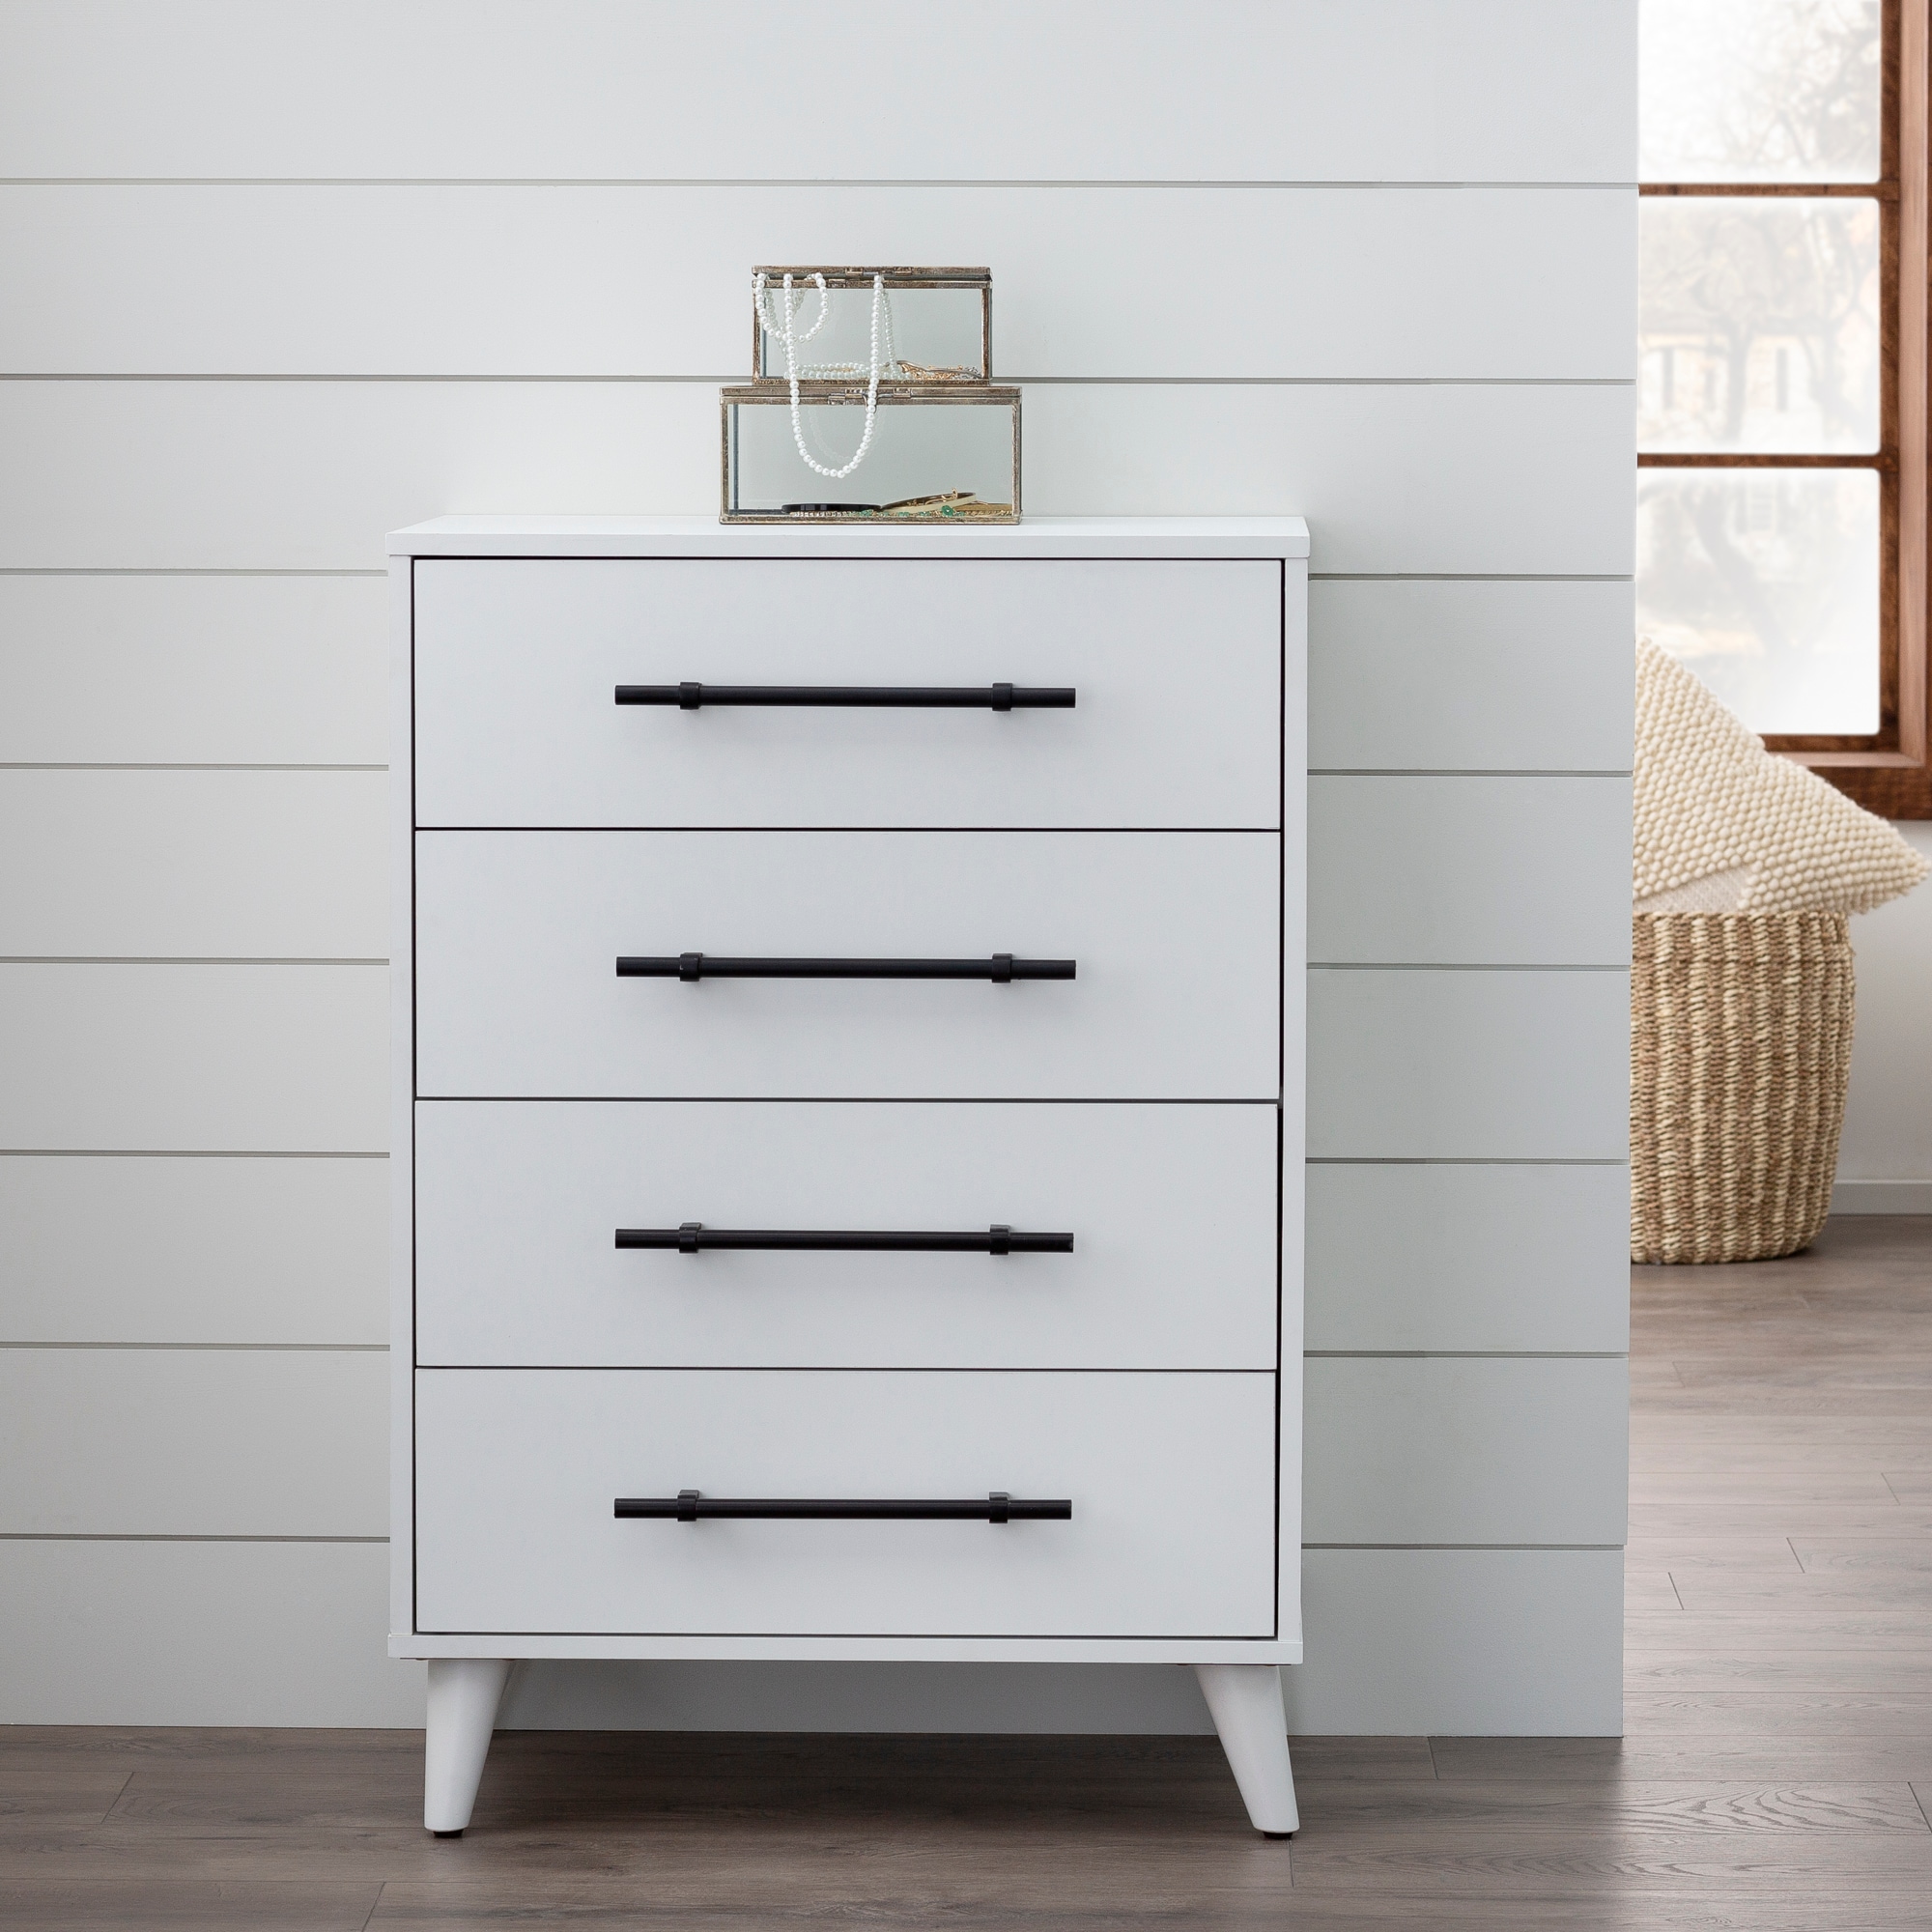 Brookside Emery White 4 Drawer Dresser, How To Fix Crooked Dresser Drawers